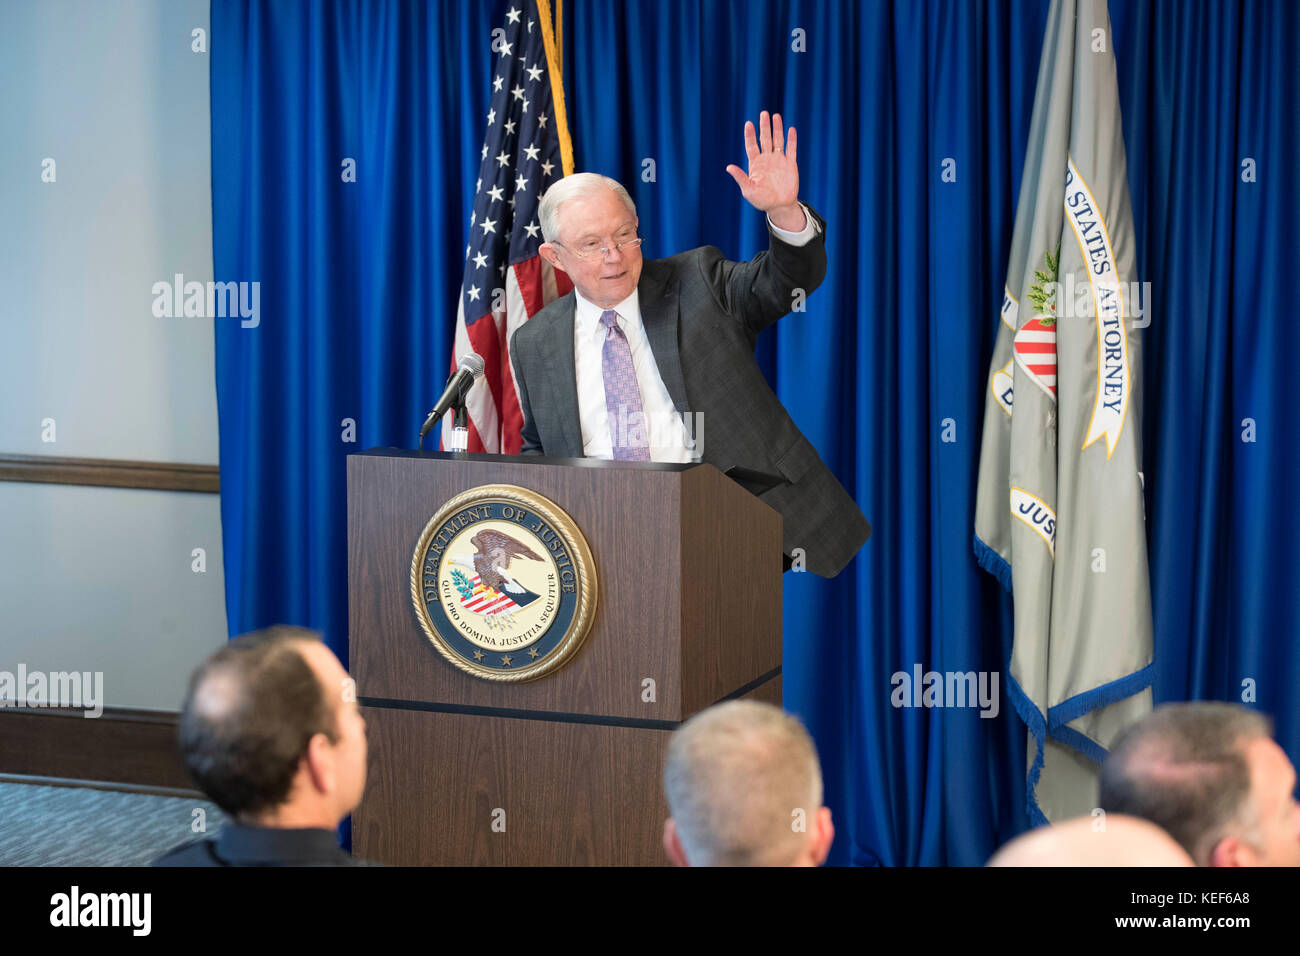 Austin, USA. 20th Oct, 2017. U.S. Attorney General Jeff Sessions, accompanied by U.S. Attorney for the Western District of Texas, Richard Durbin, Jr., speaks to U.S. attorneys on the Trump administration's immigration policy during a visit on Friday. Sessions was met by a few dozen protesters but no incidents were reported. Credit: Bob Daemmrich/Alamy Live News Stock Photo